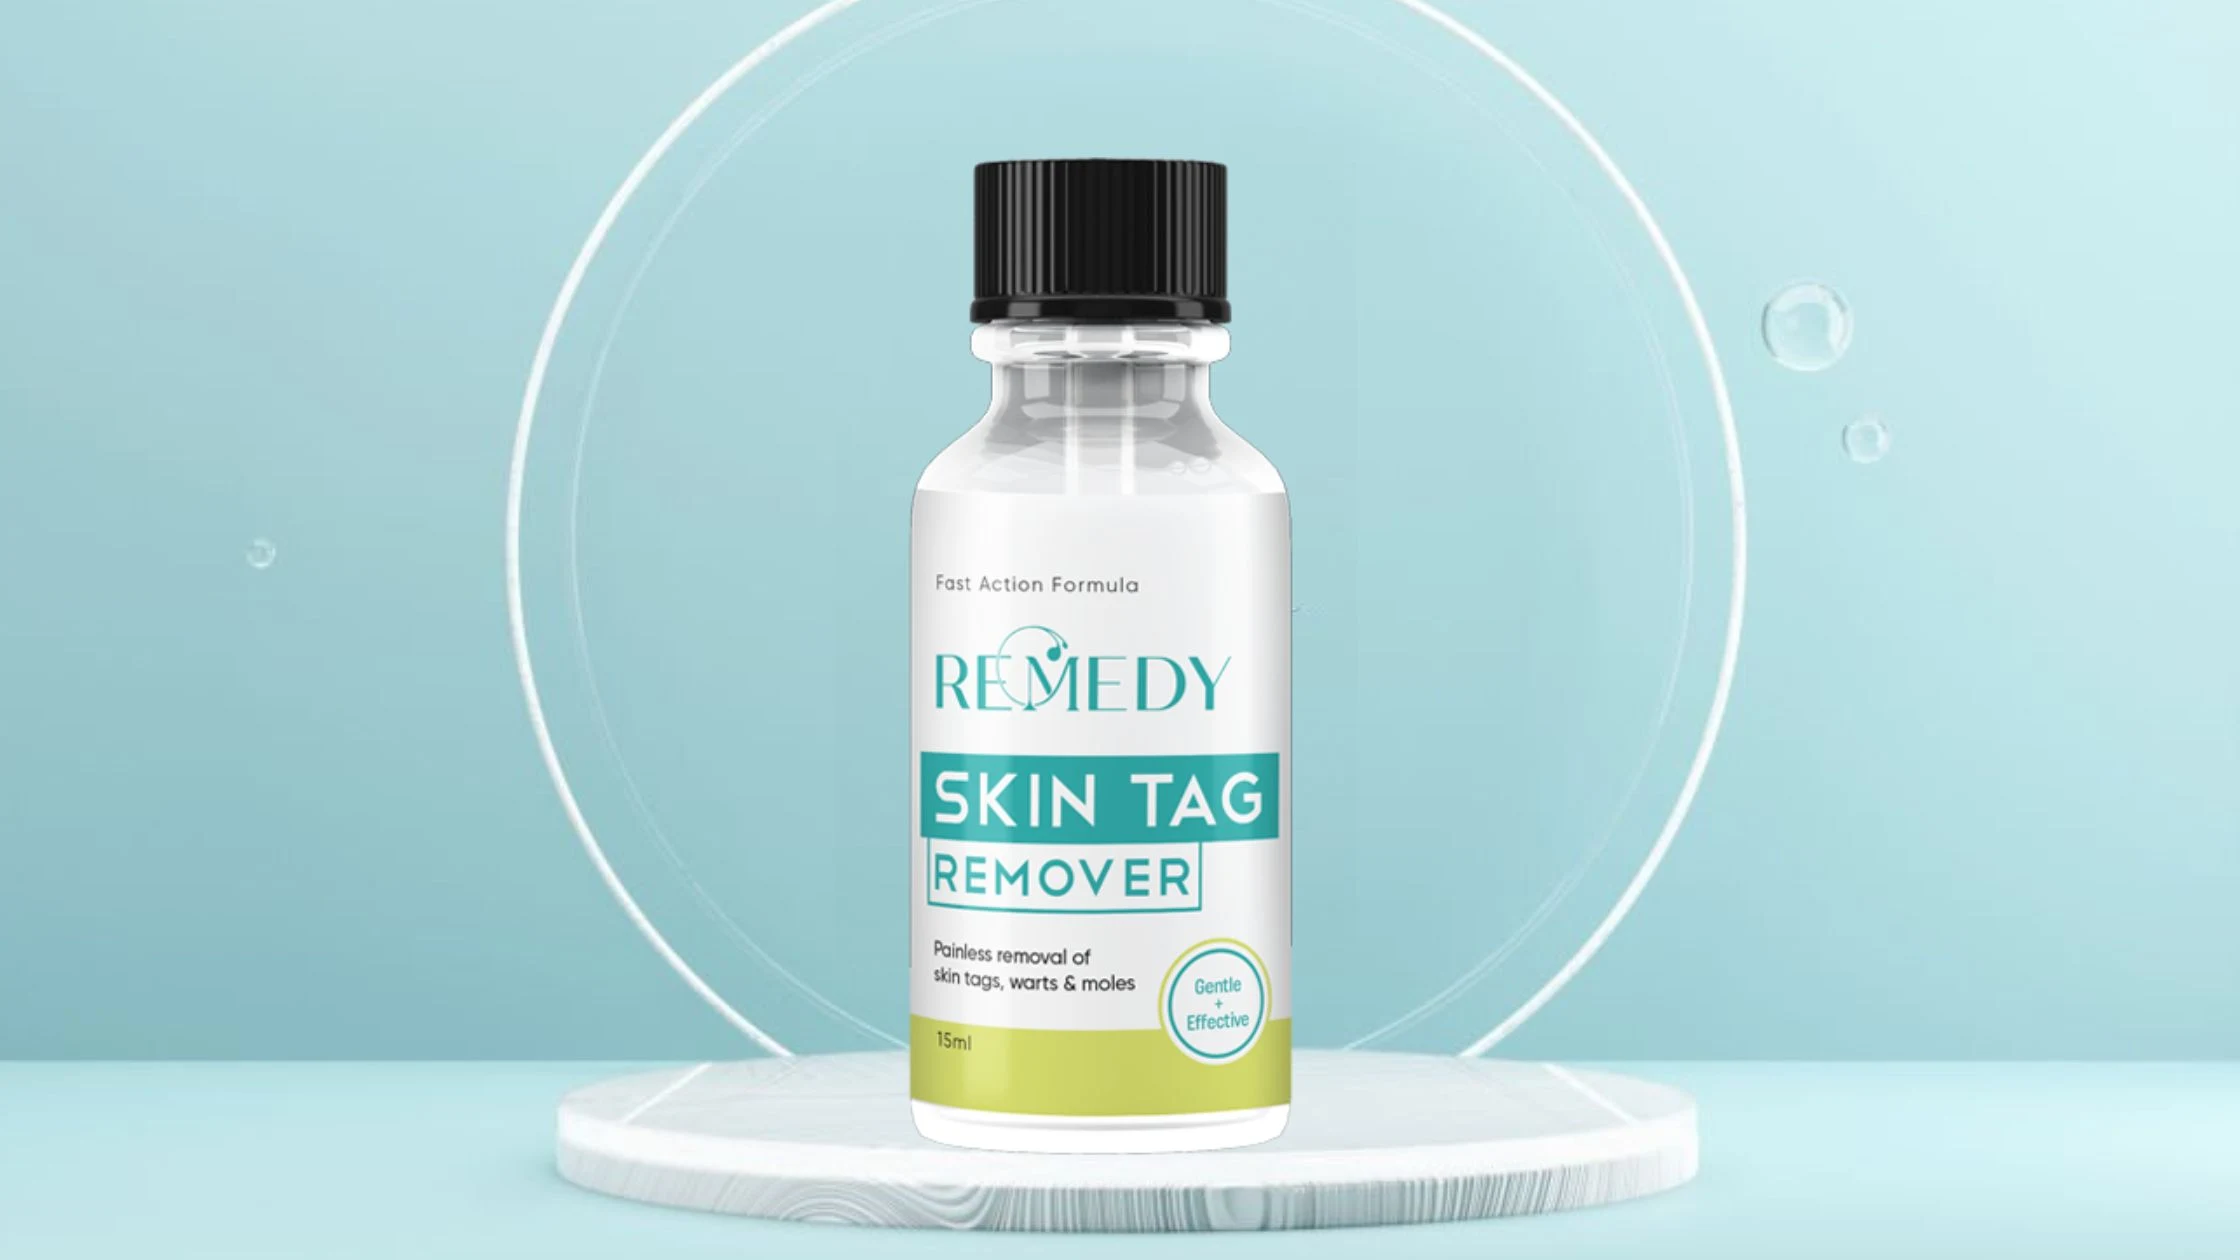 Remedy Skin Tag Remover Reviews